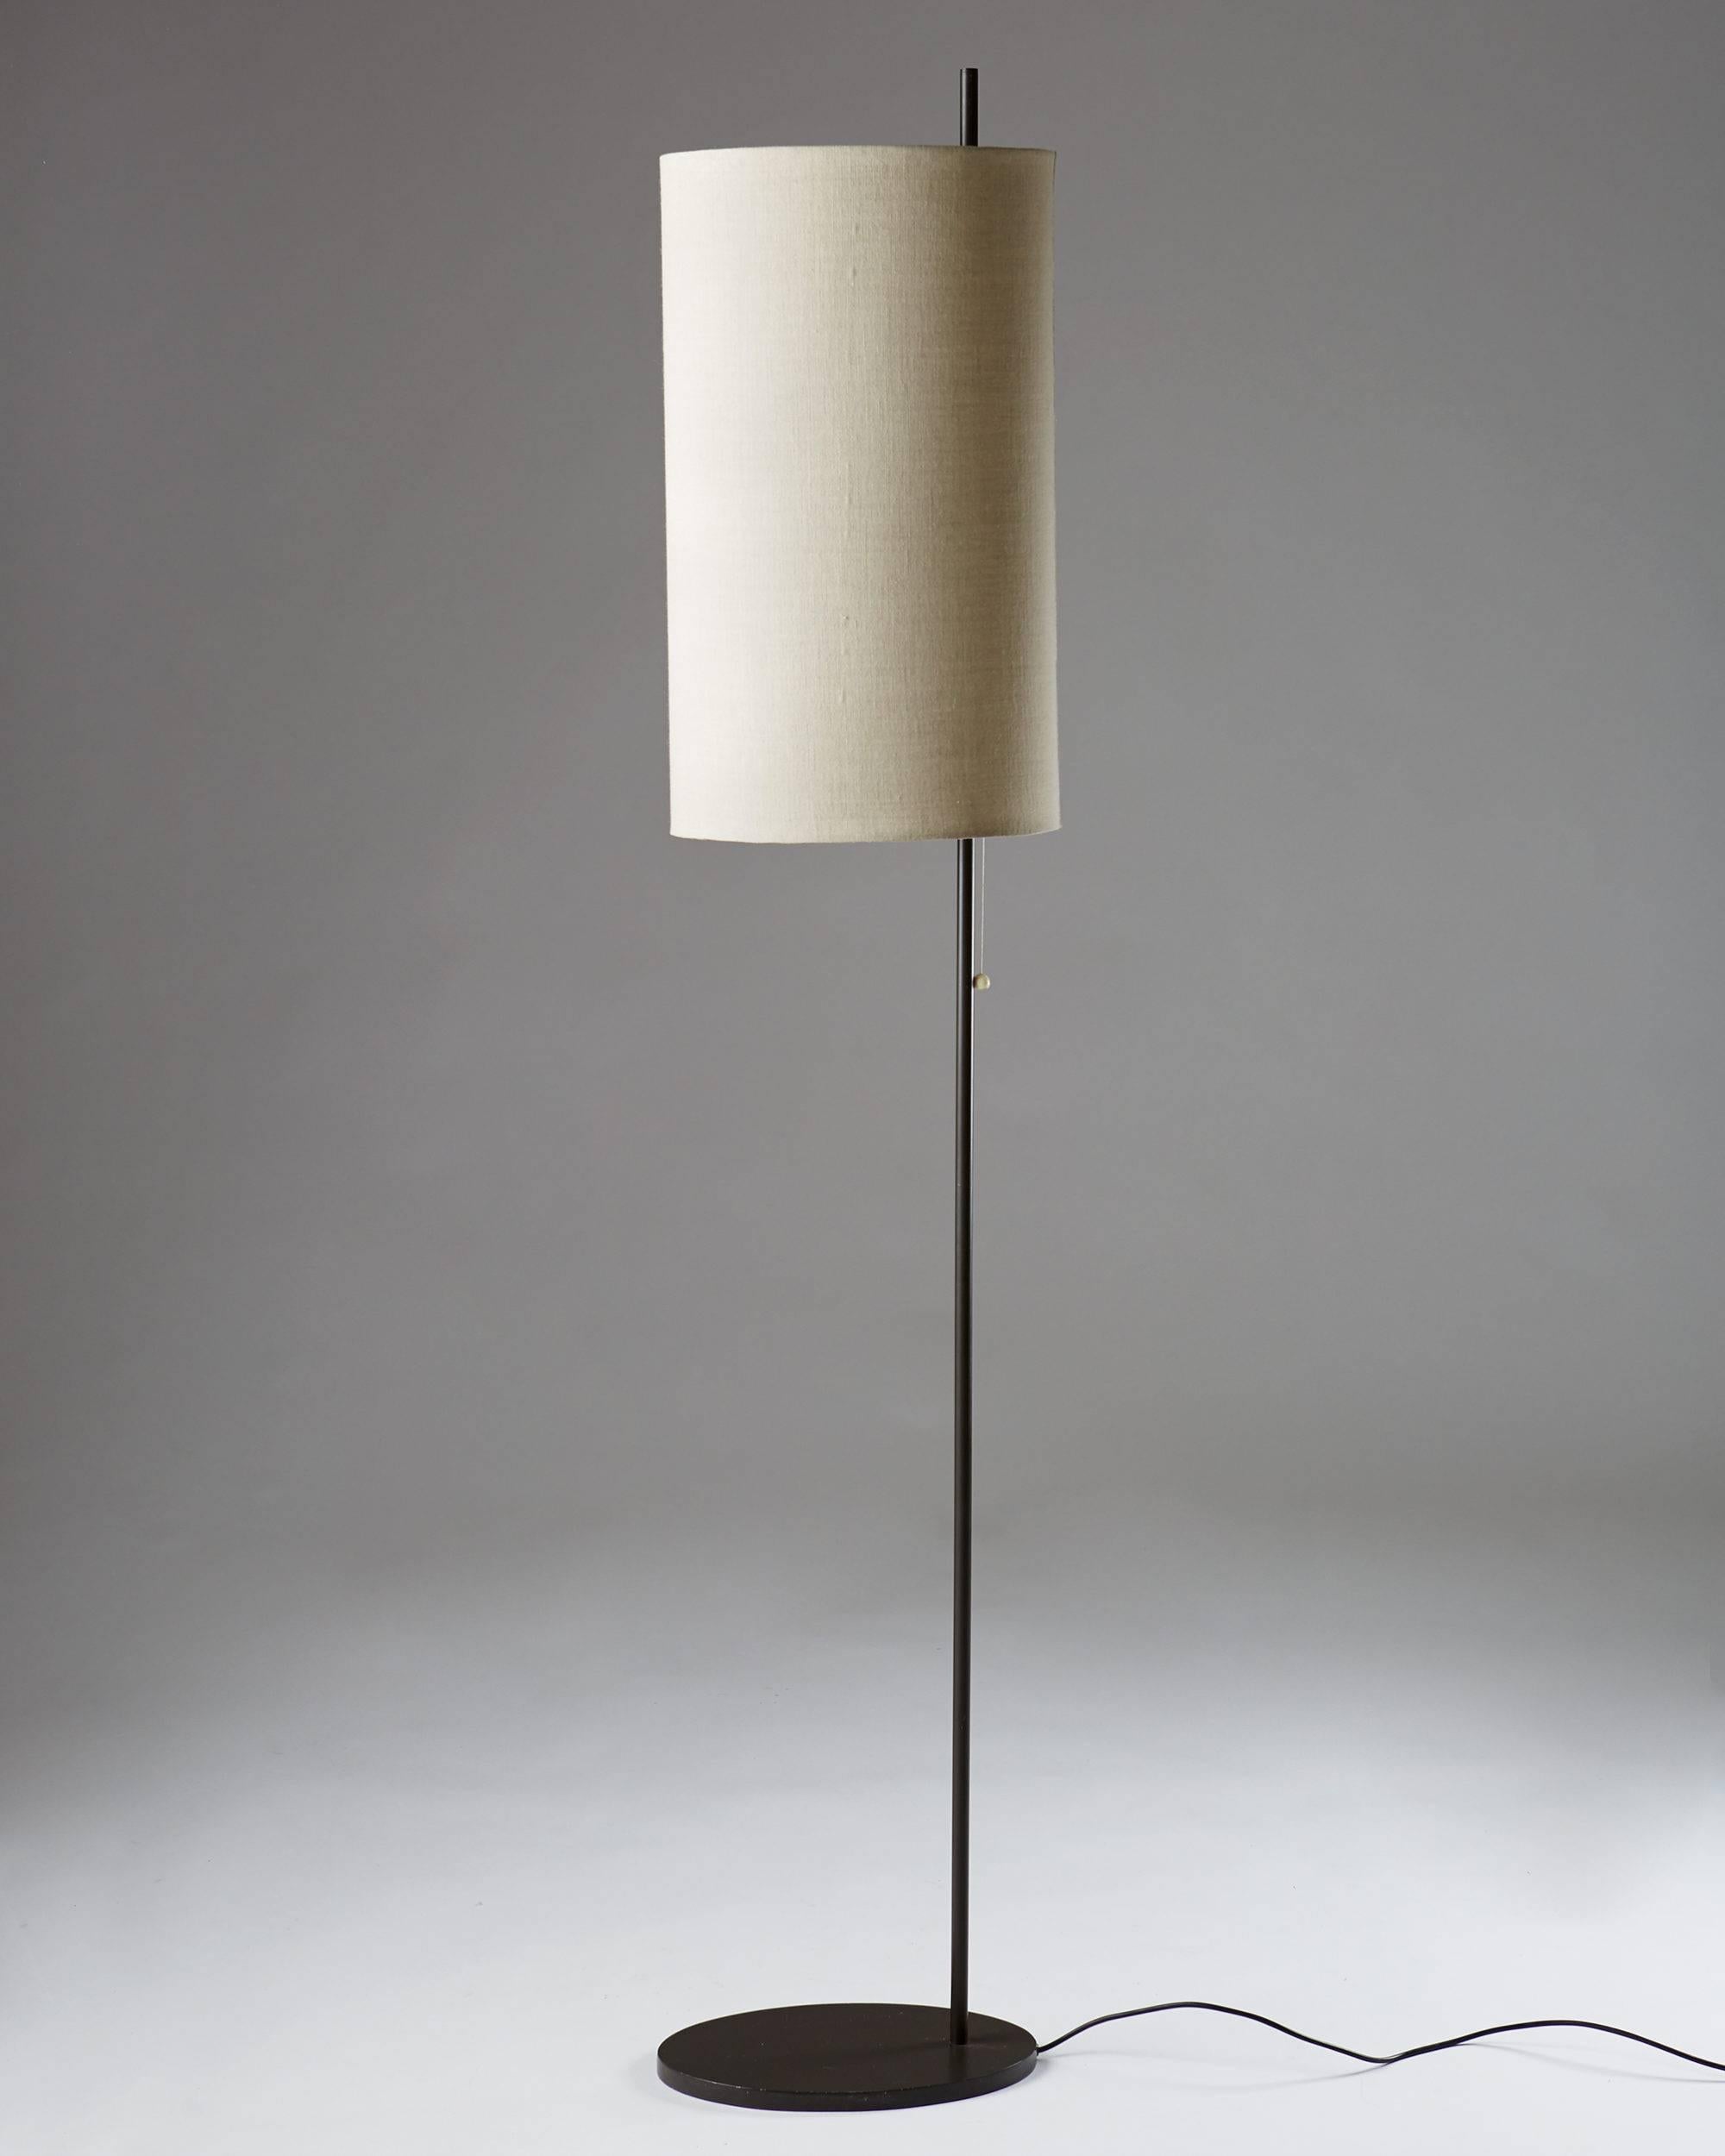 “Royal”, floor lamp designed by Arne Jacobsen for Louis Poulsen,
Denmark, 1956.

Lacquered steel and fabric shade. 

Measures: H 180 cm/ 71